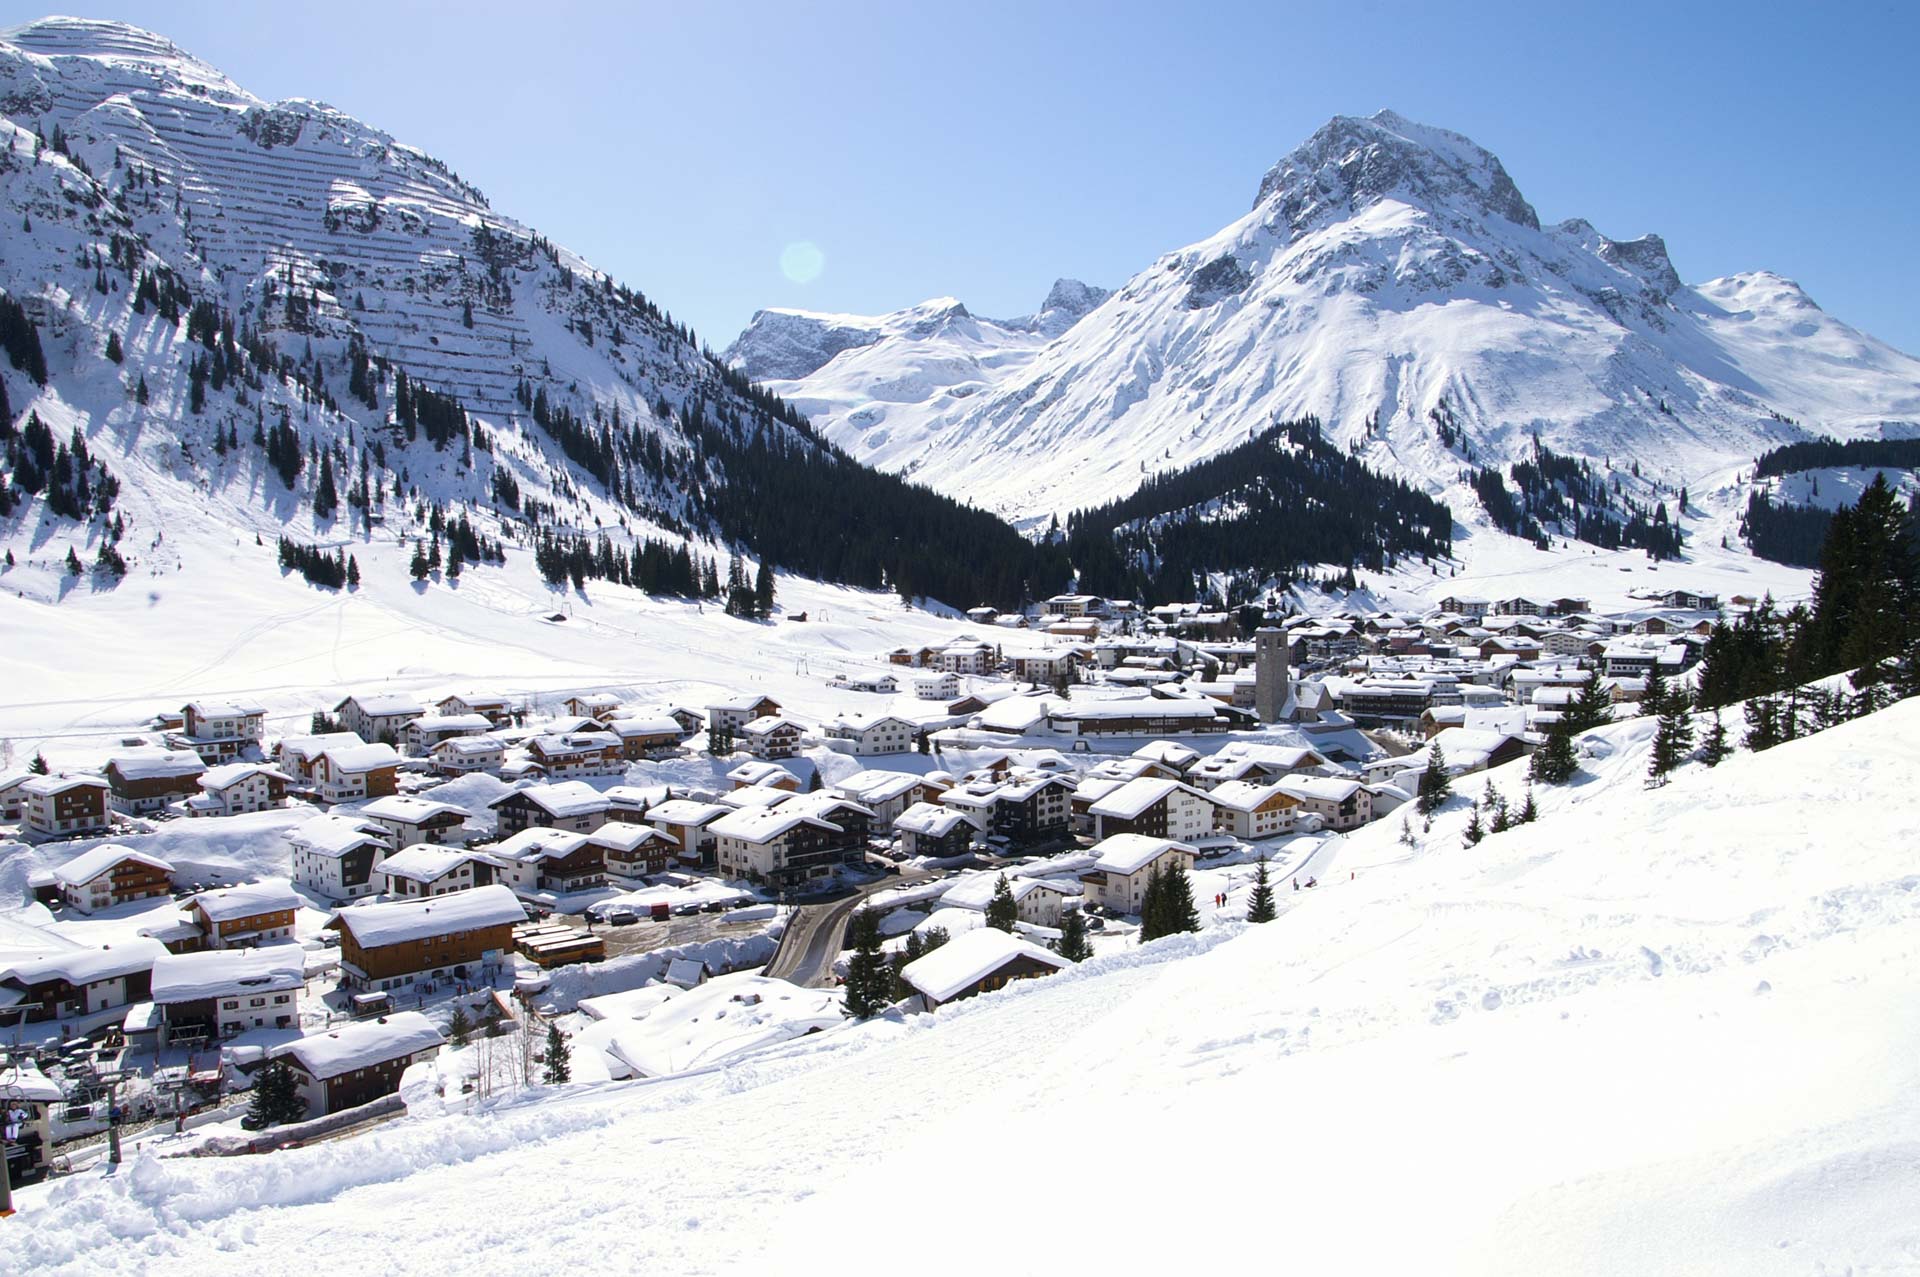 The pretty Austrian ski village of Lech am Arlberg lying between two large snow covered mountains